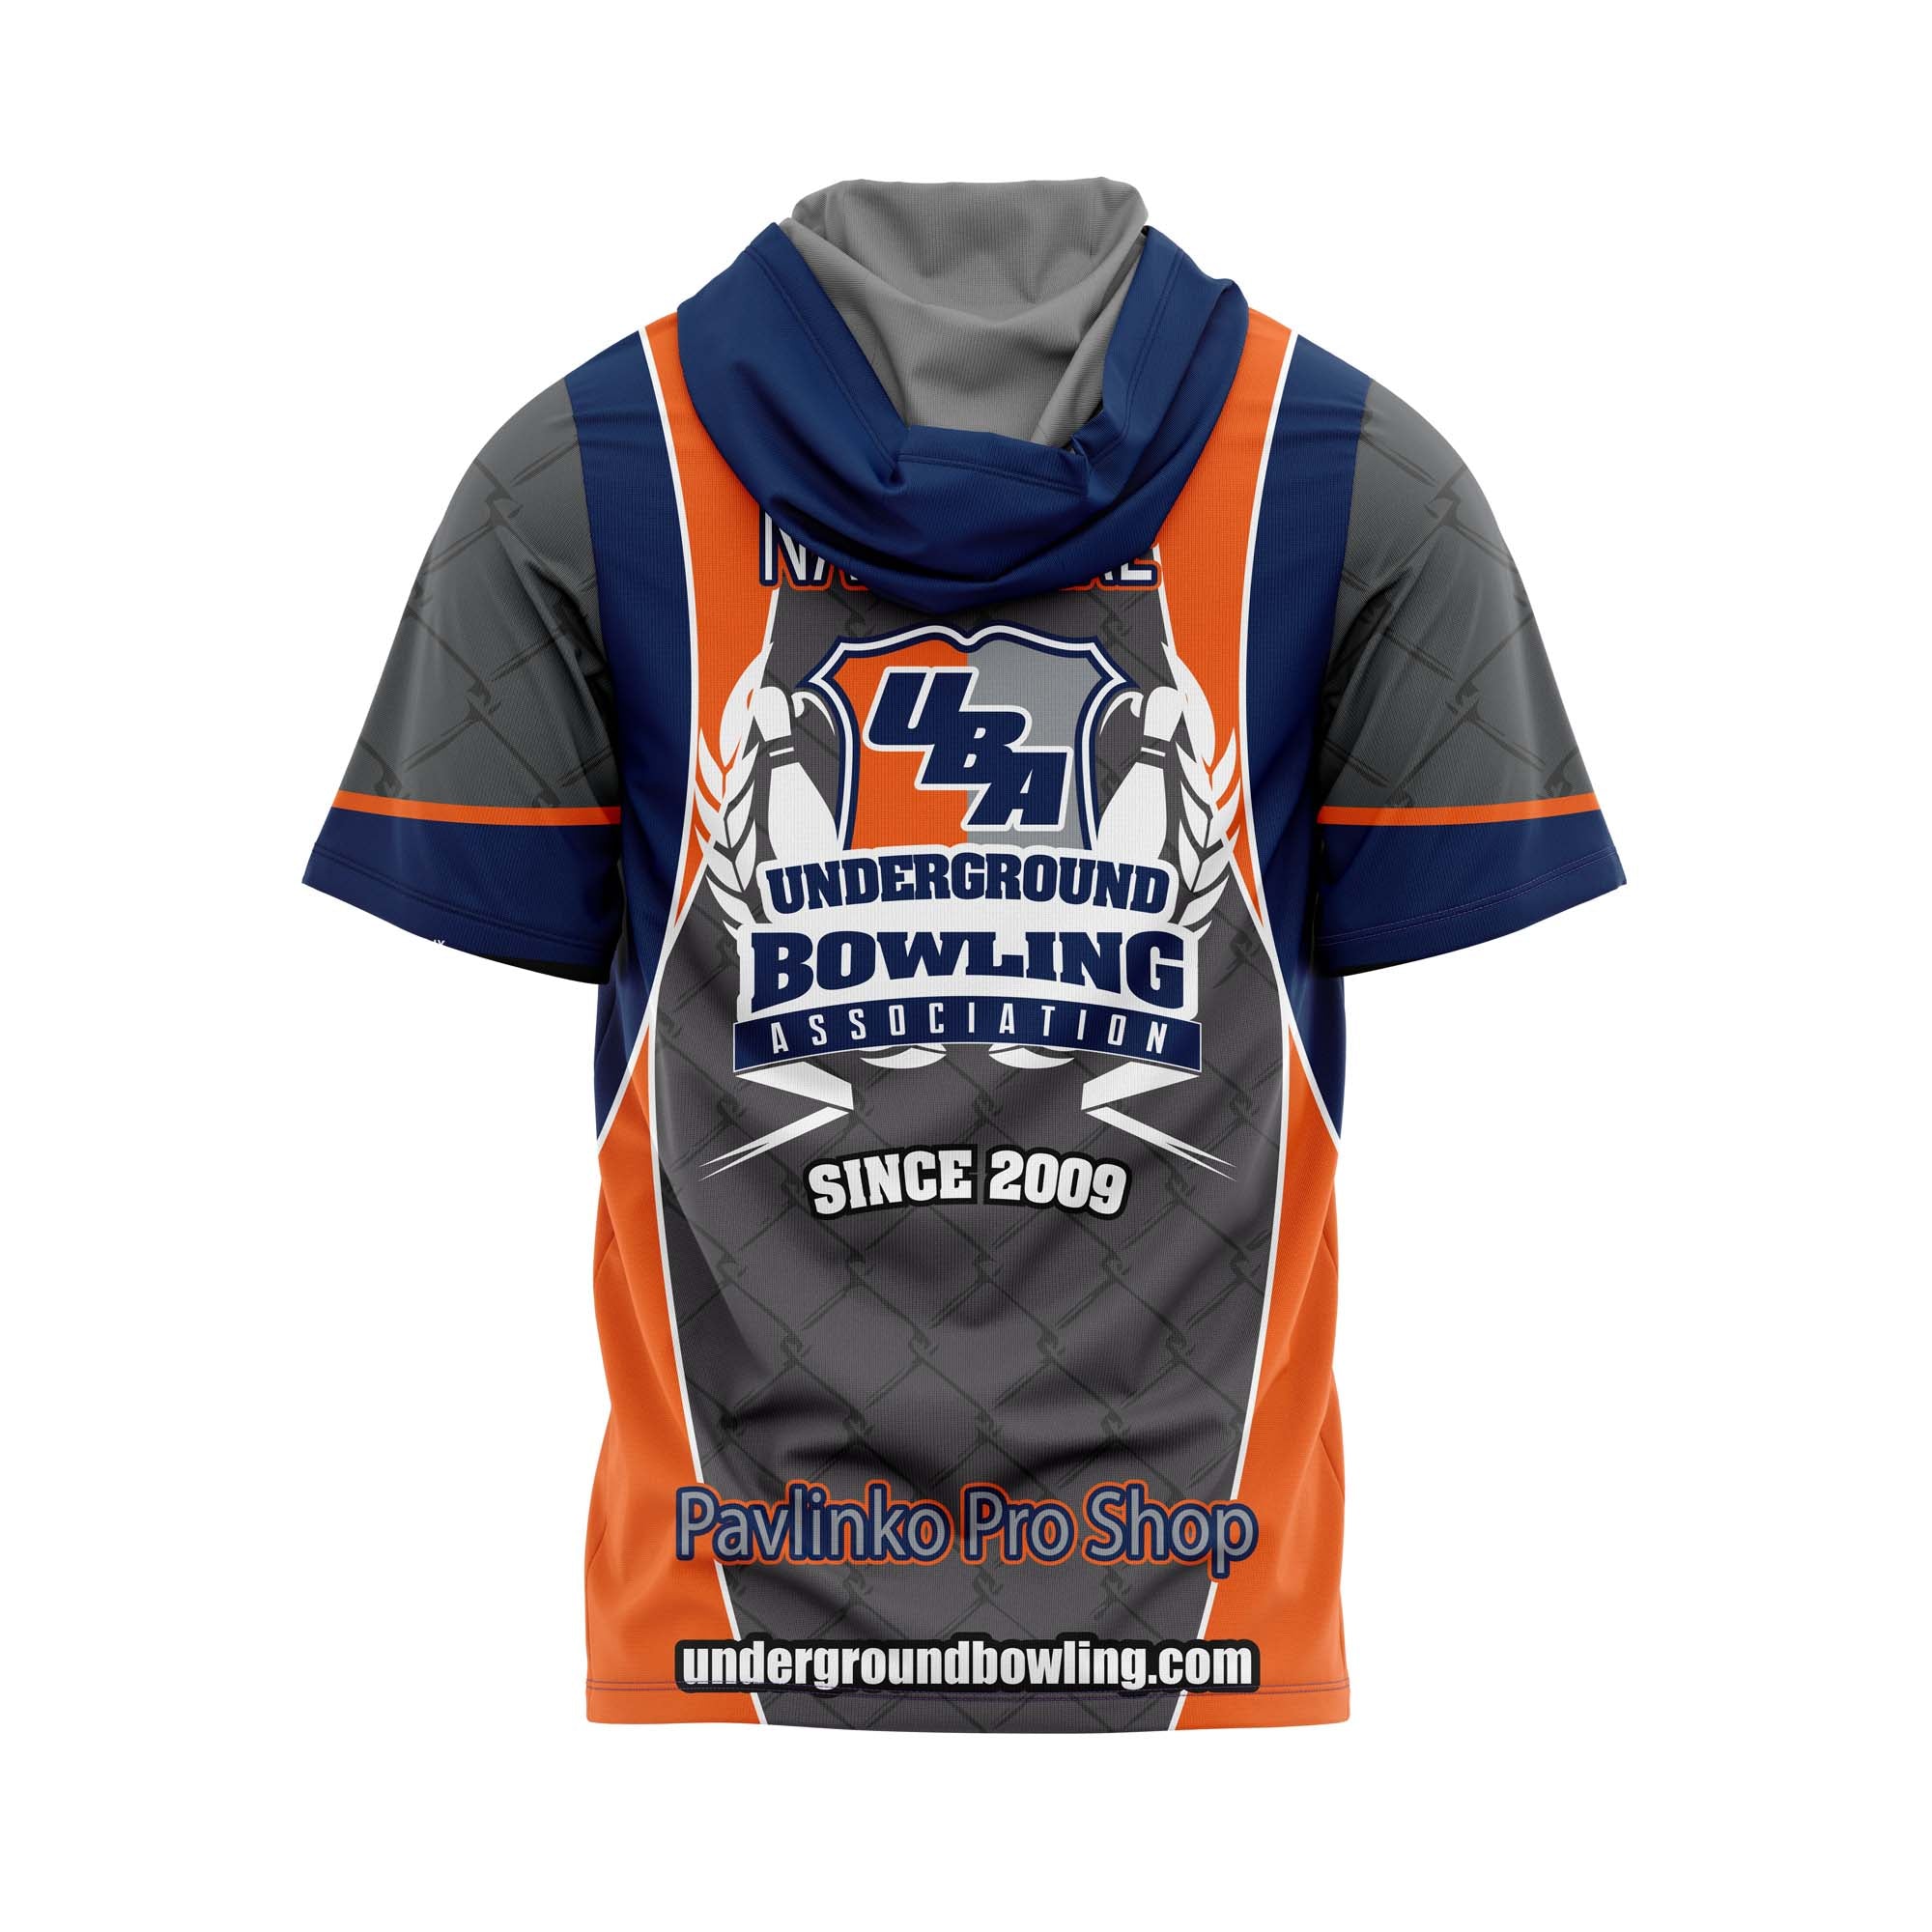 New Jersey Drillers Home Jersey